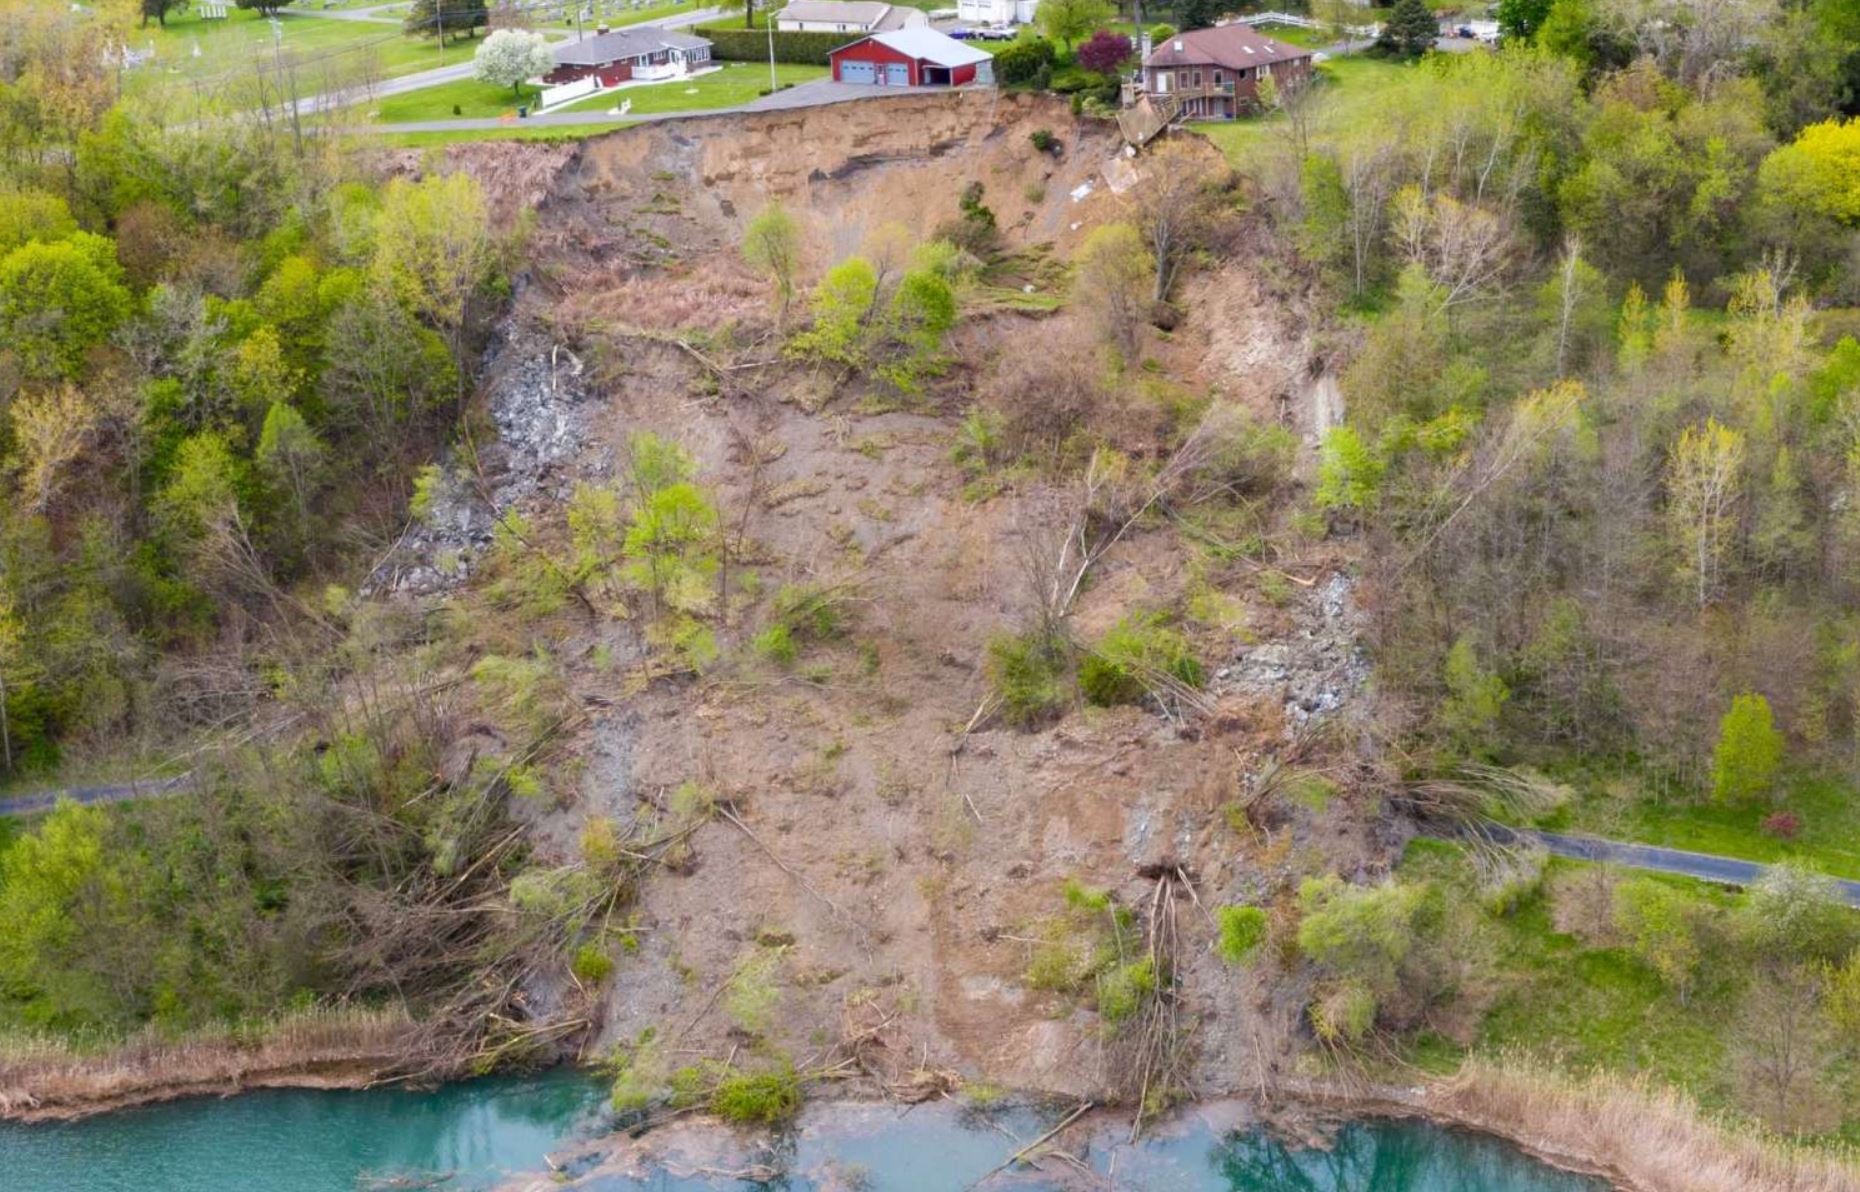 The landslide at Waterford in New York.